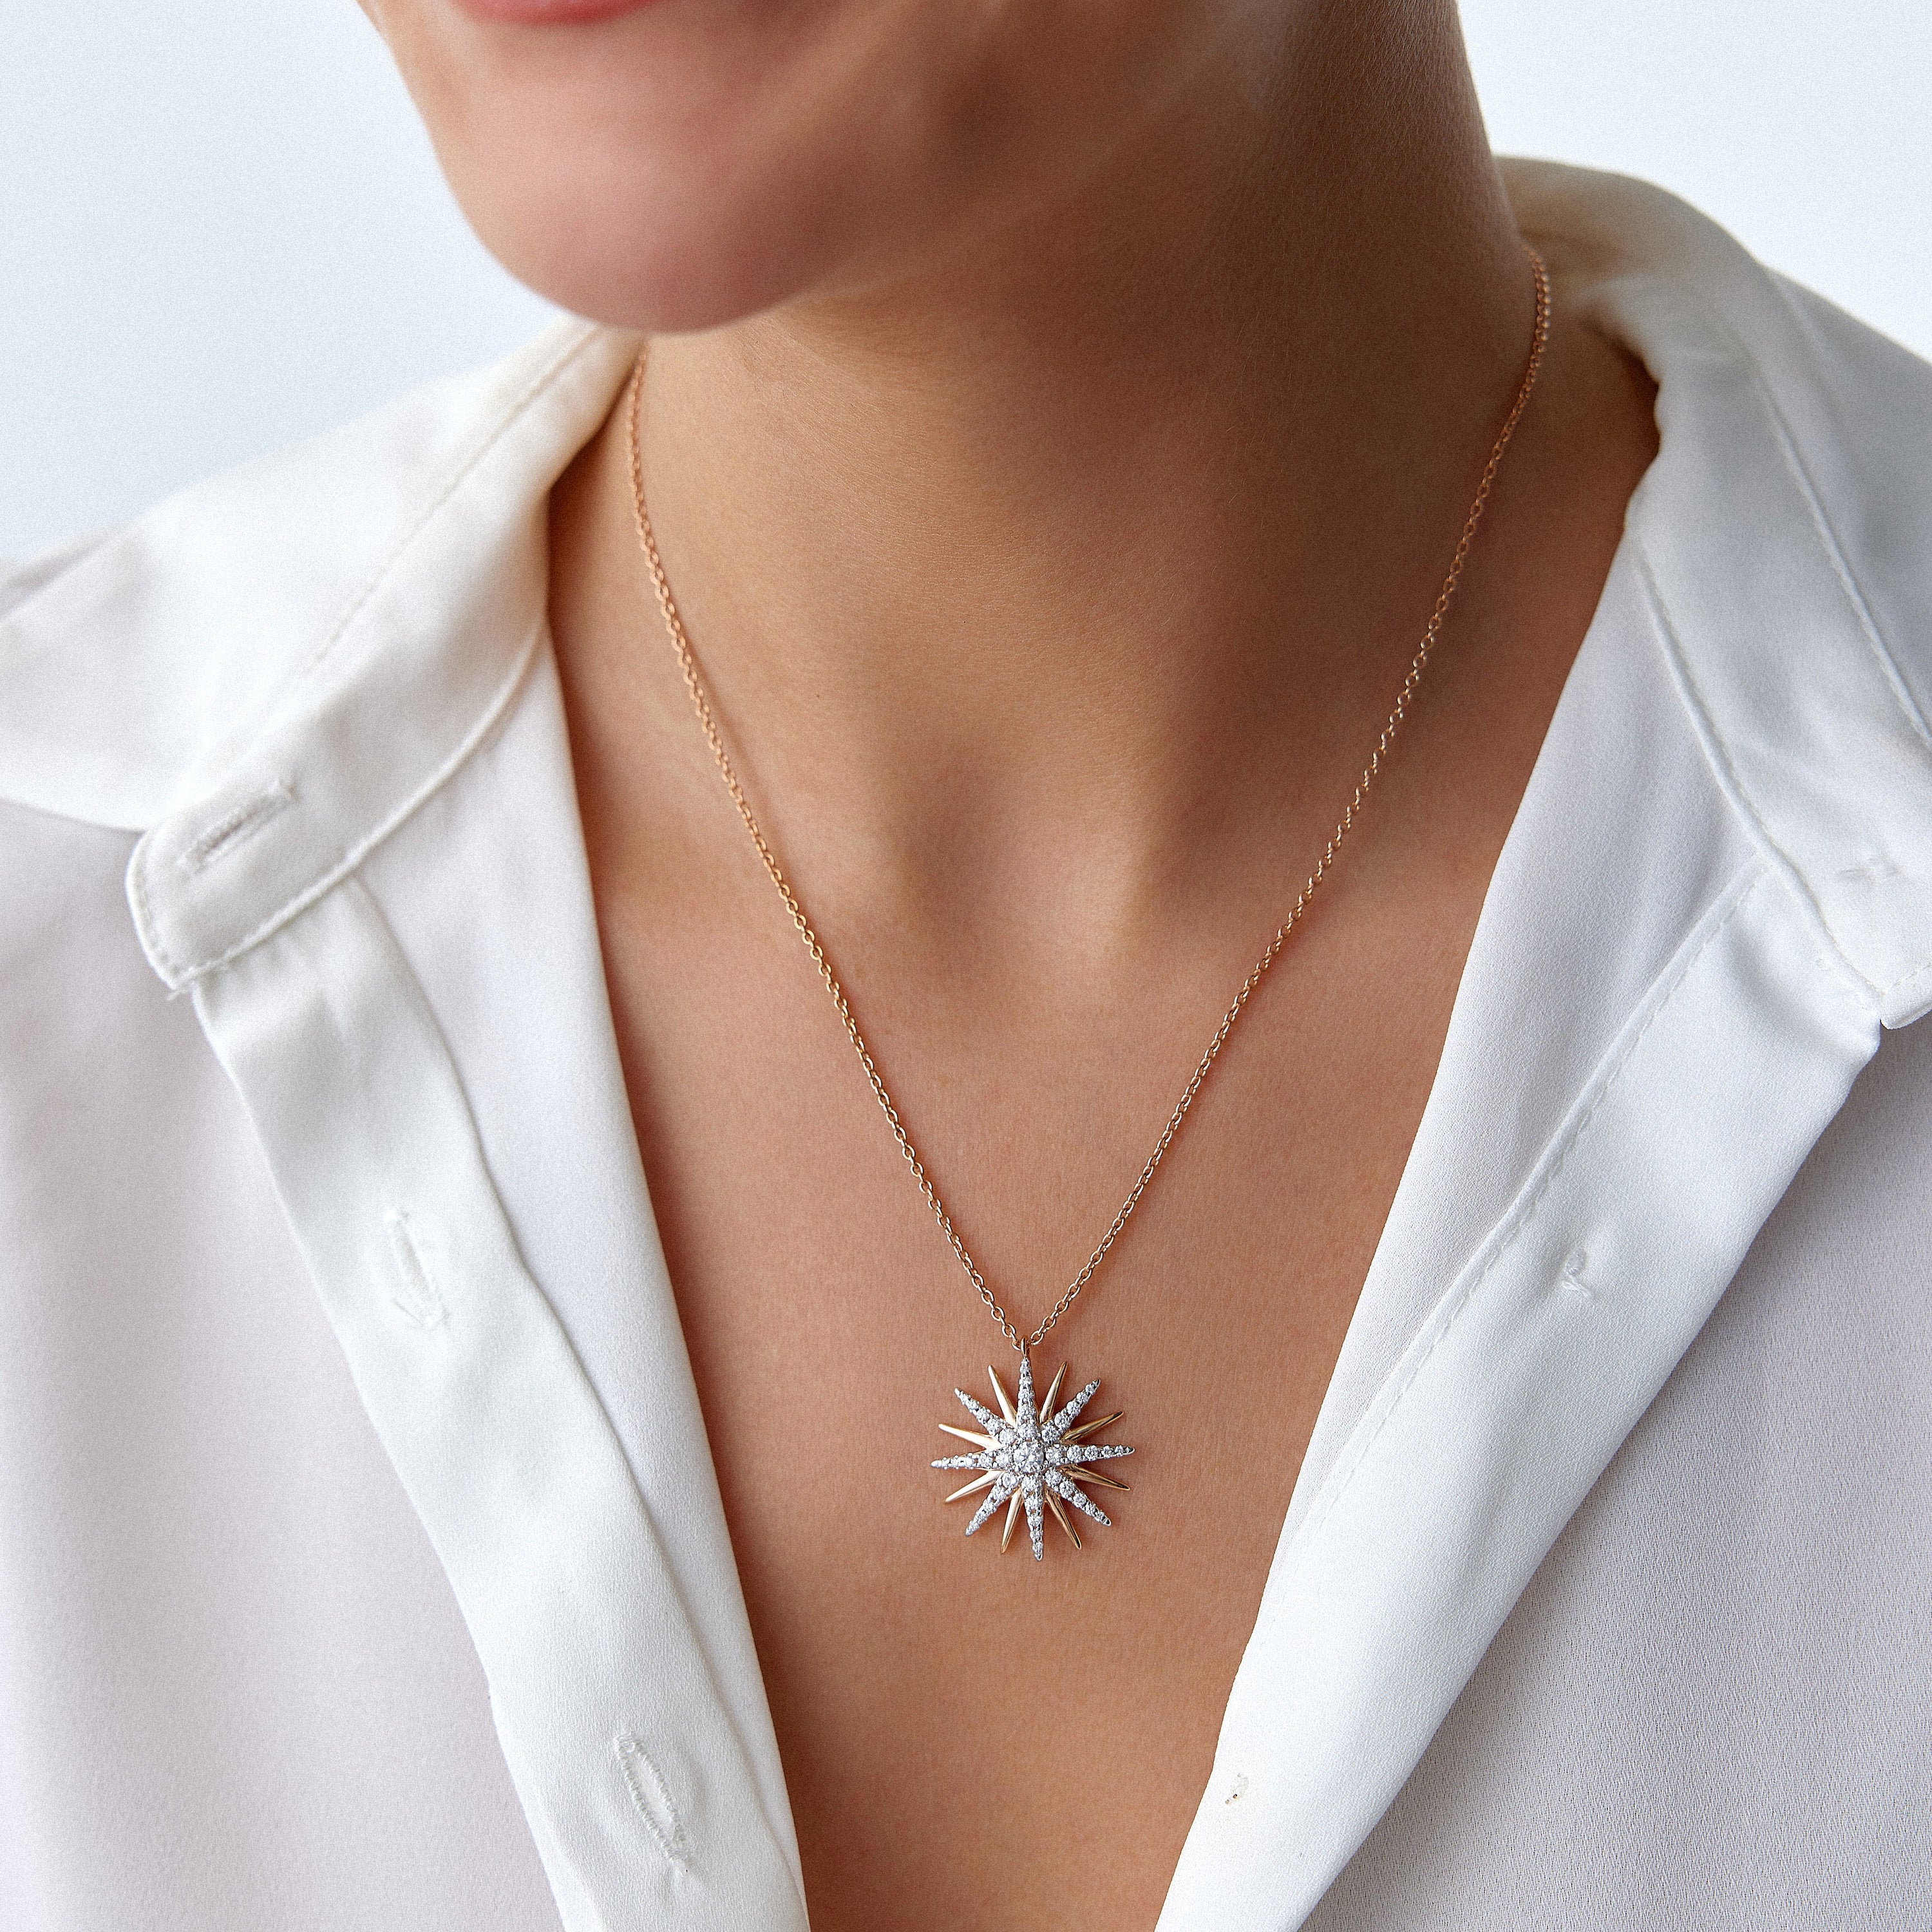 Diamond Starburst Necklace Available in 14K and 18K Gold